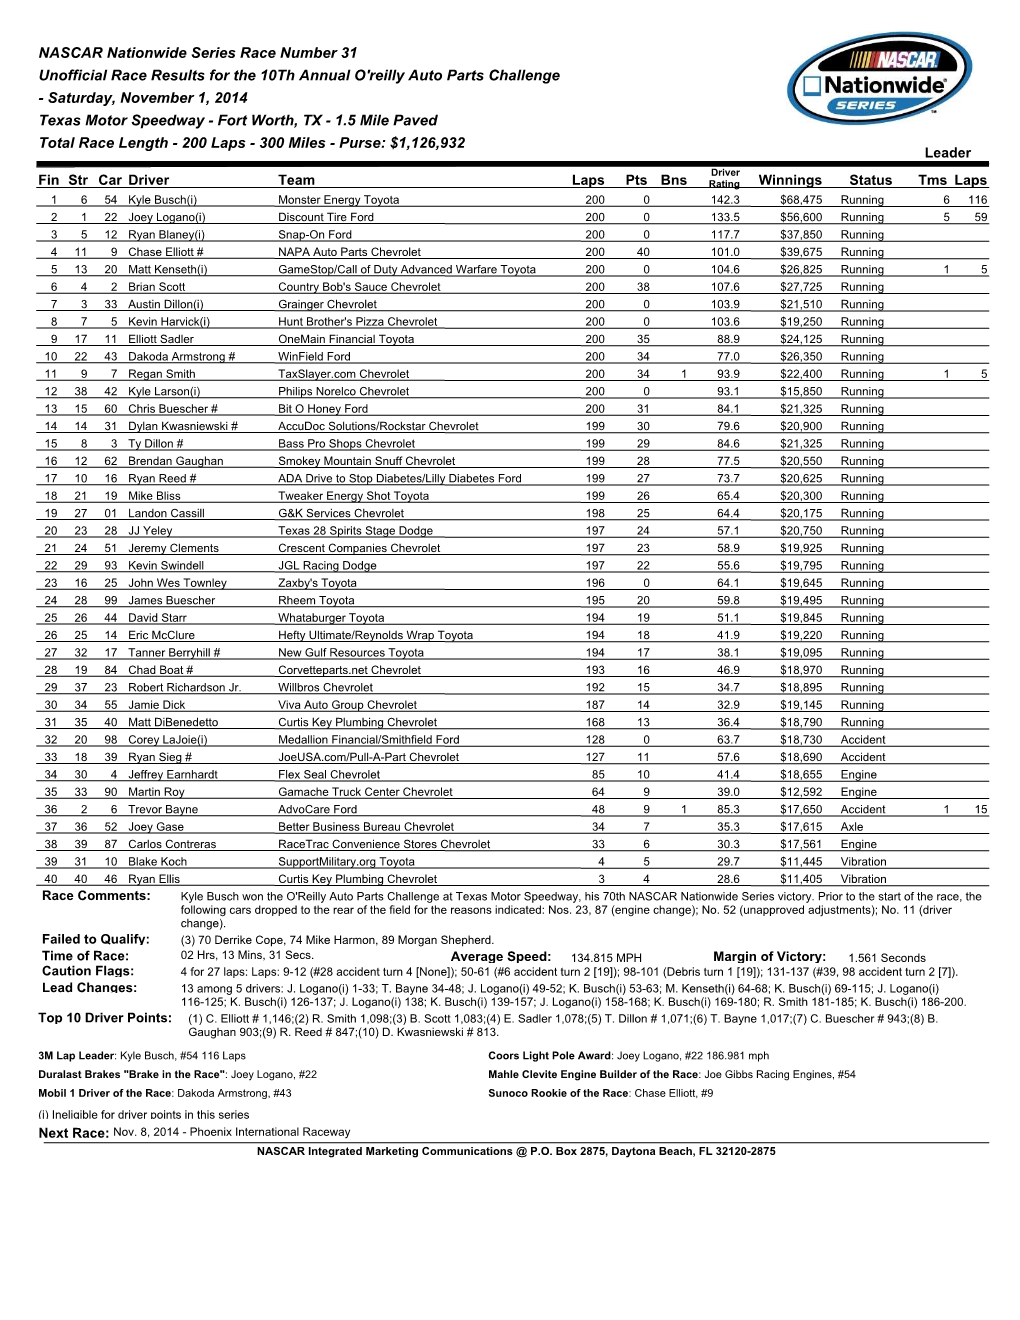 NASCAR Nationwide Series Race Number 31 Unofficial Race Results